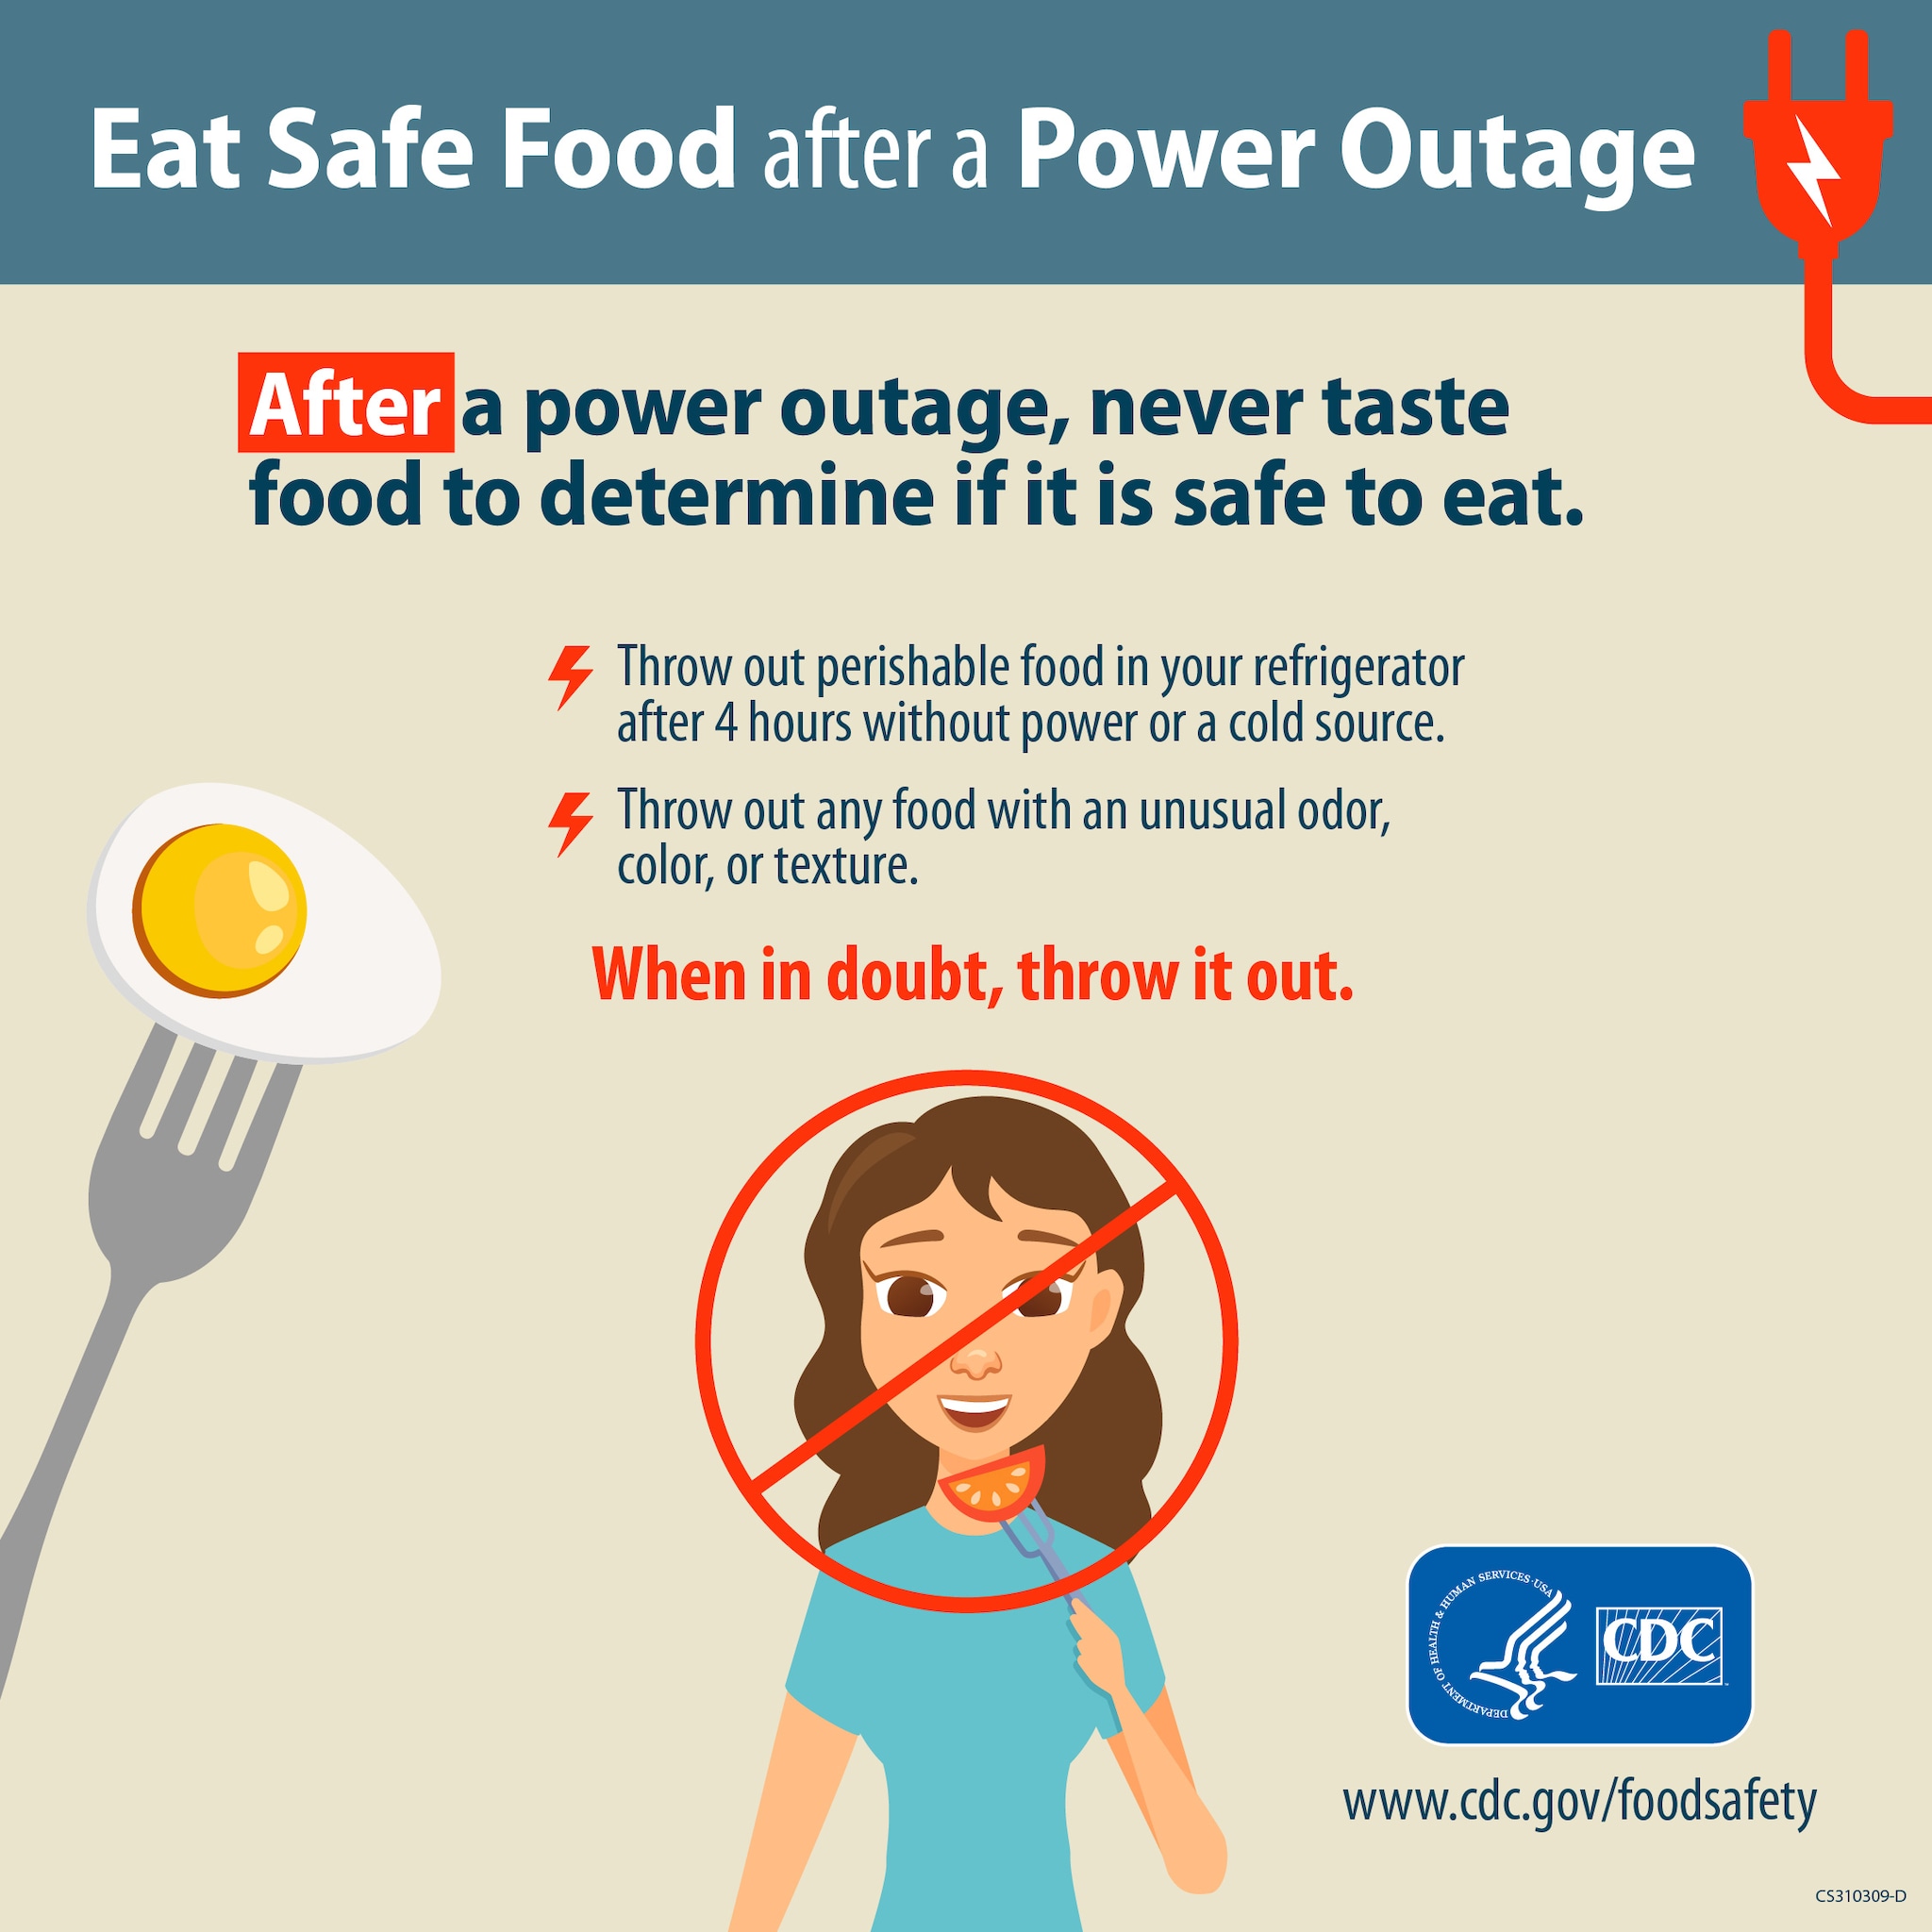 Eat safe food after a power outage